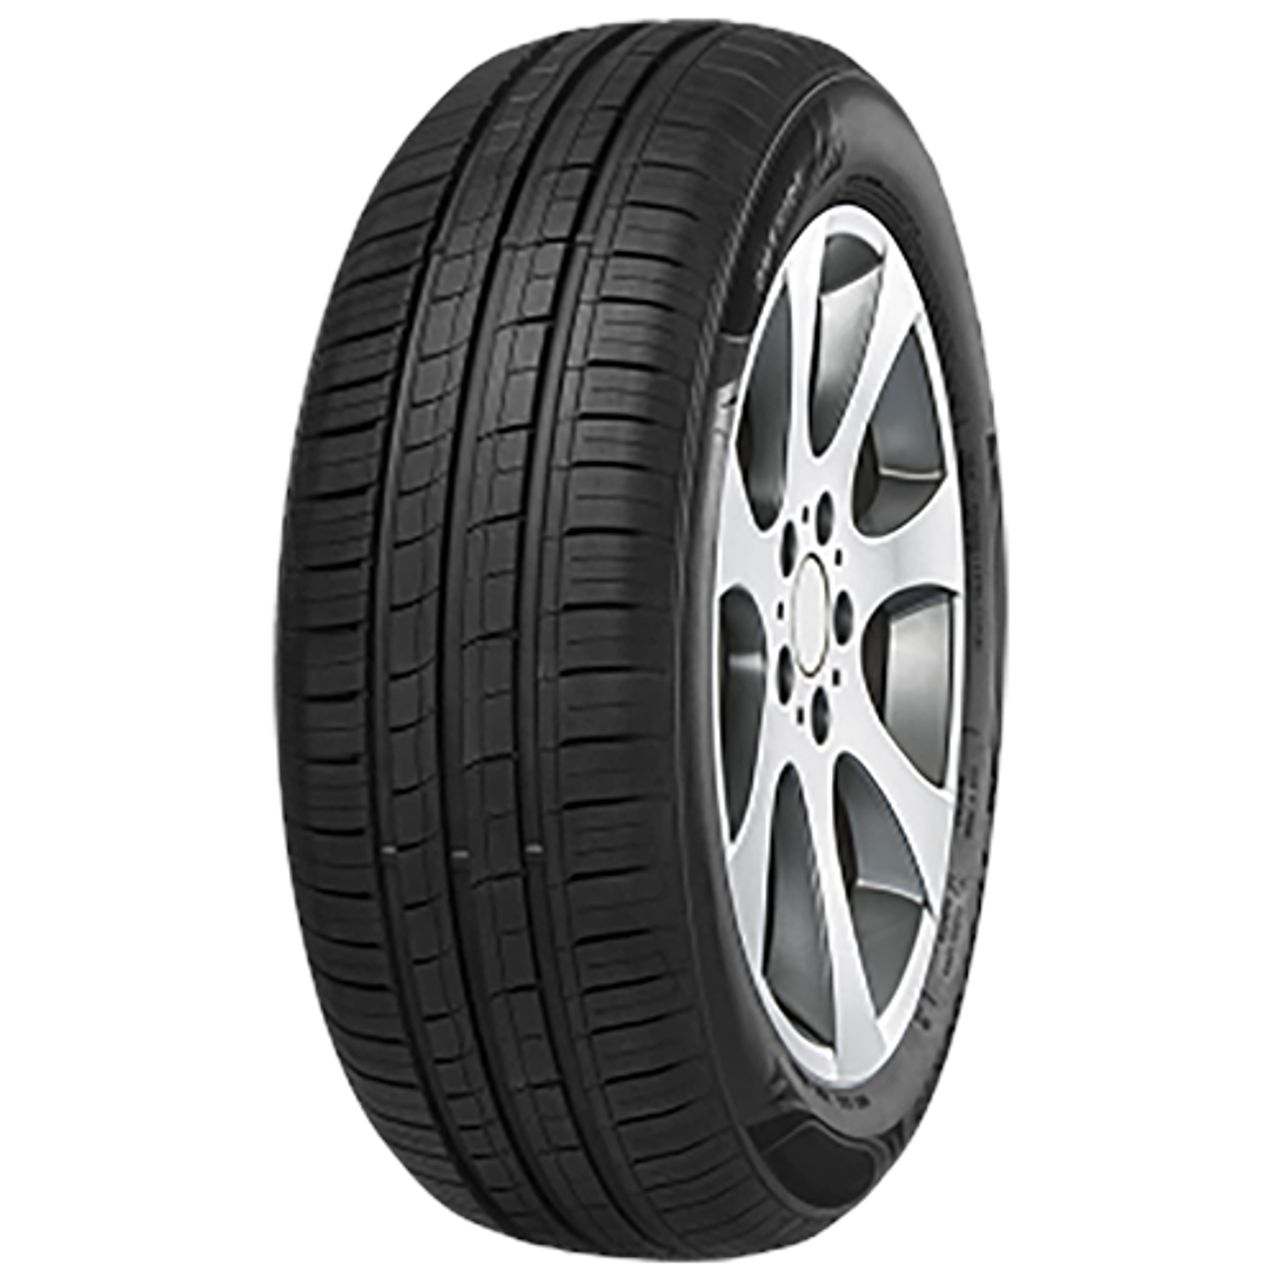 IMPERIAL ECODRIVER 4 175/65R14 86T